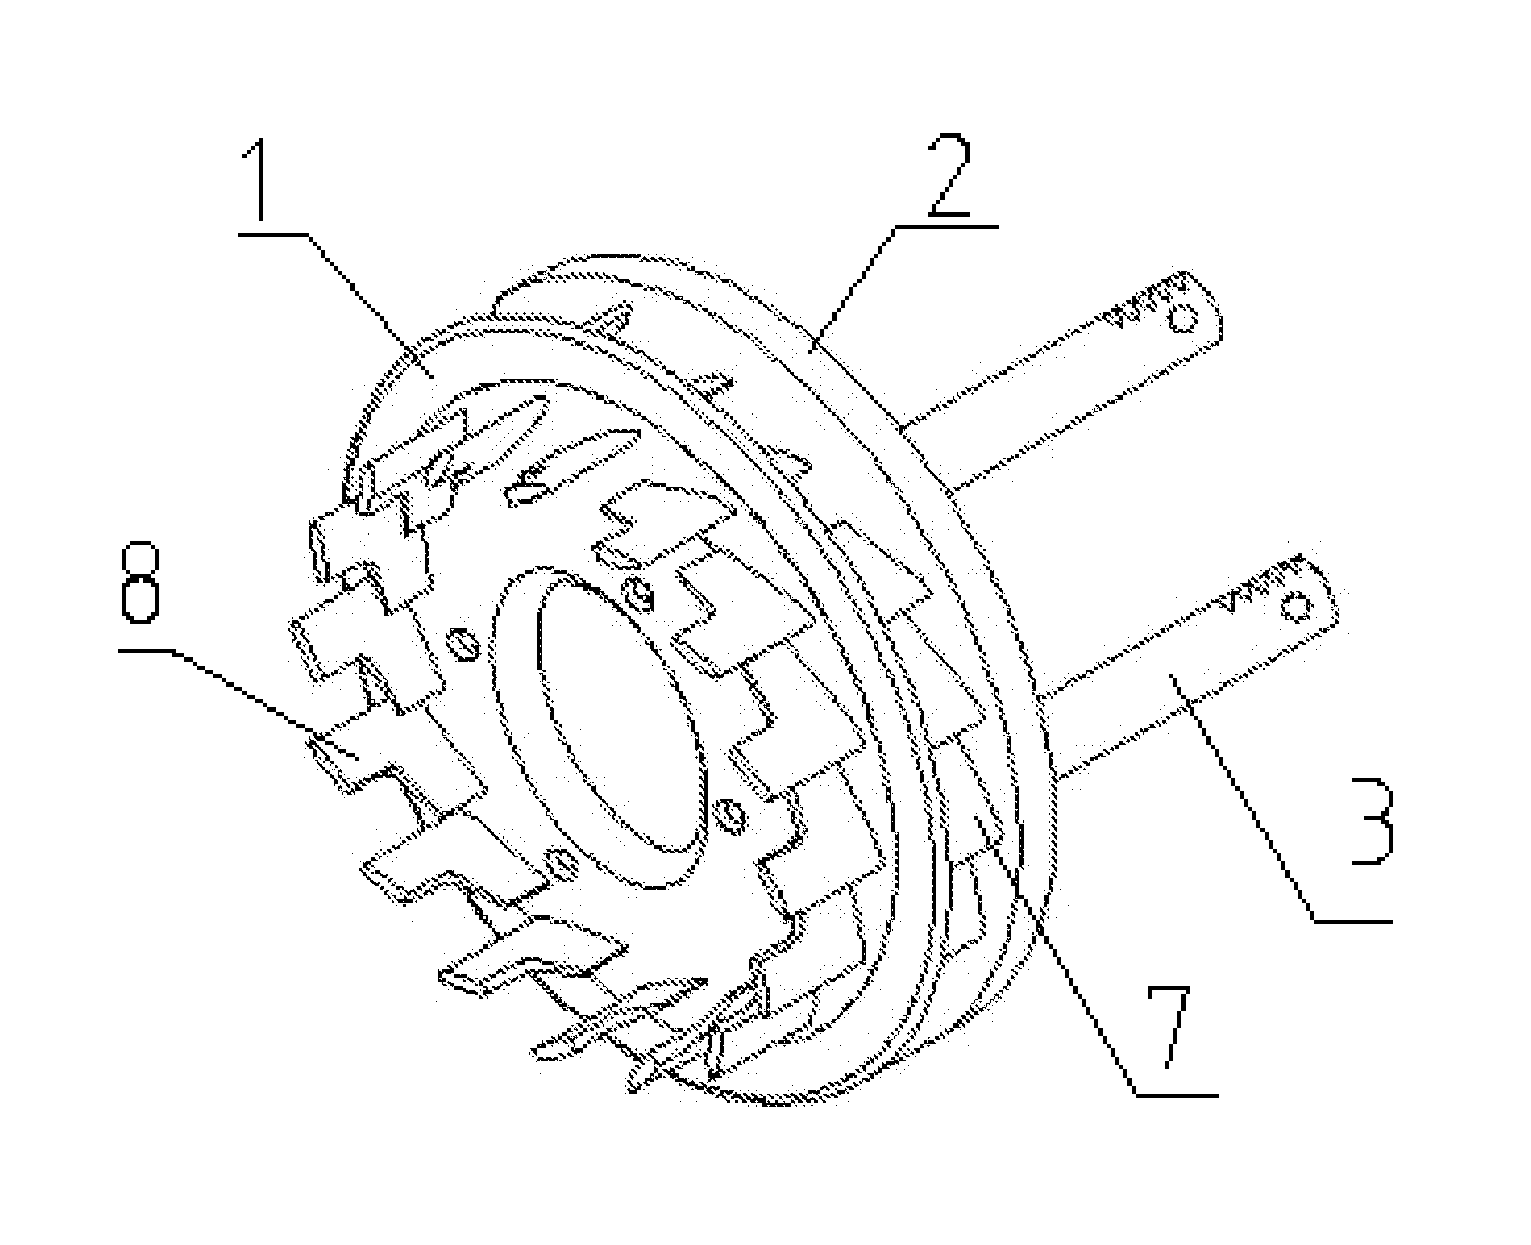 Turbocharger with a double-vane nozzle system